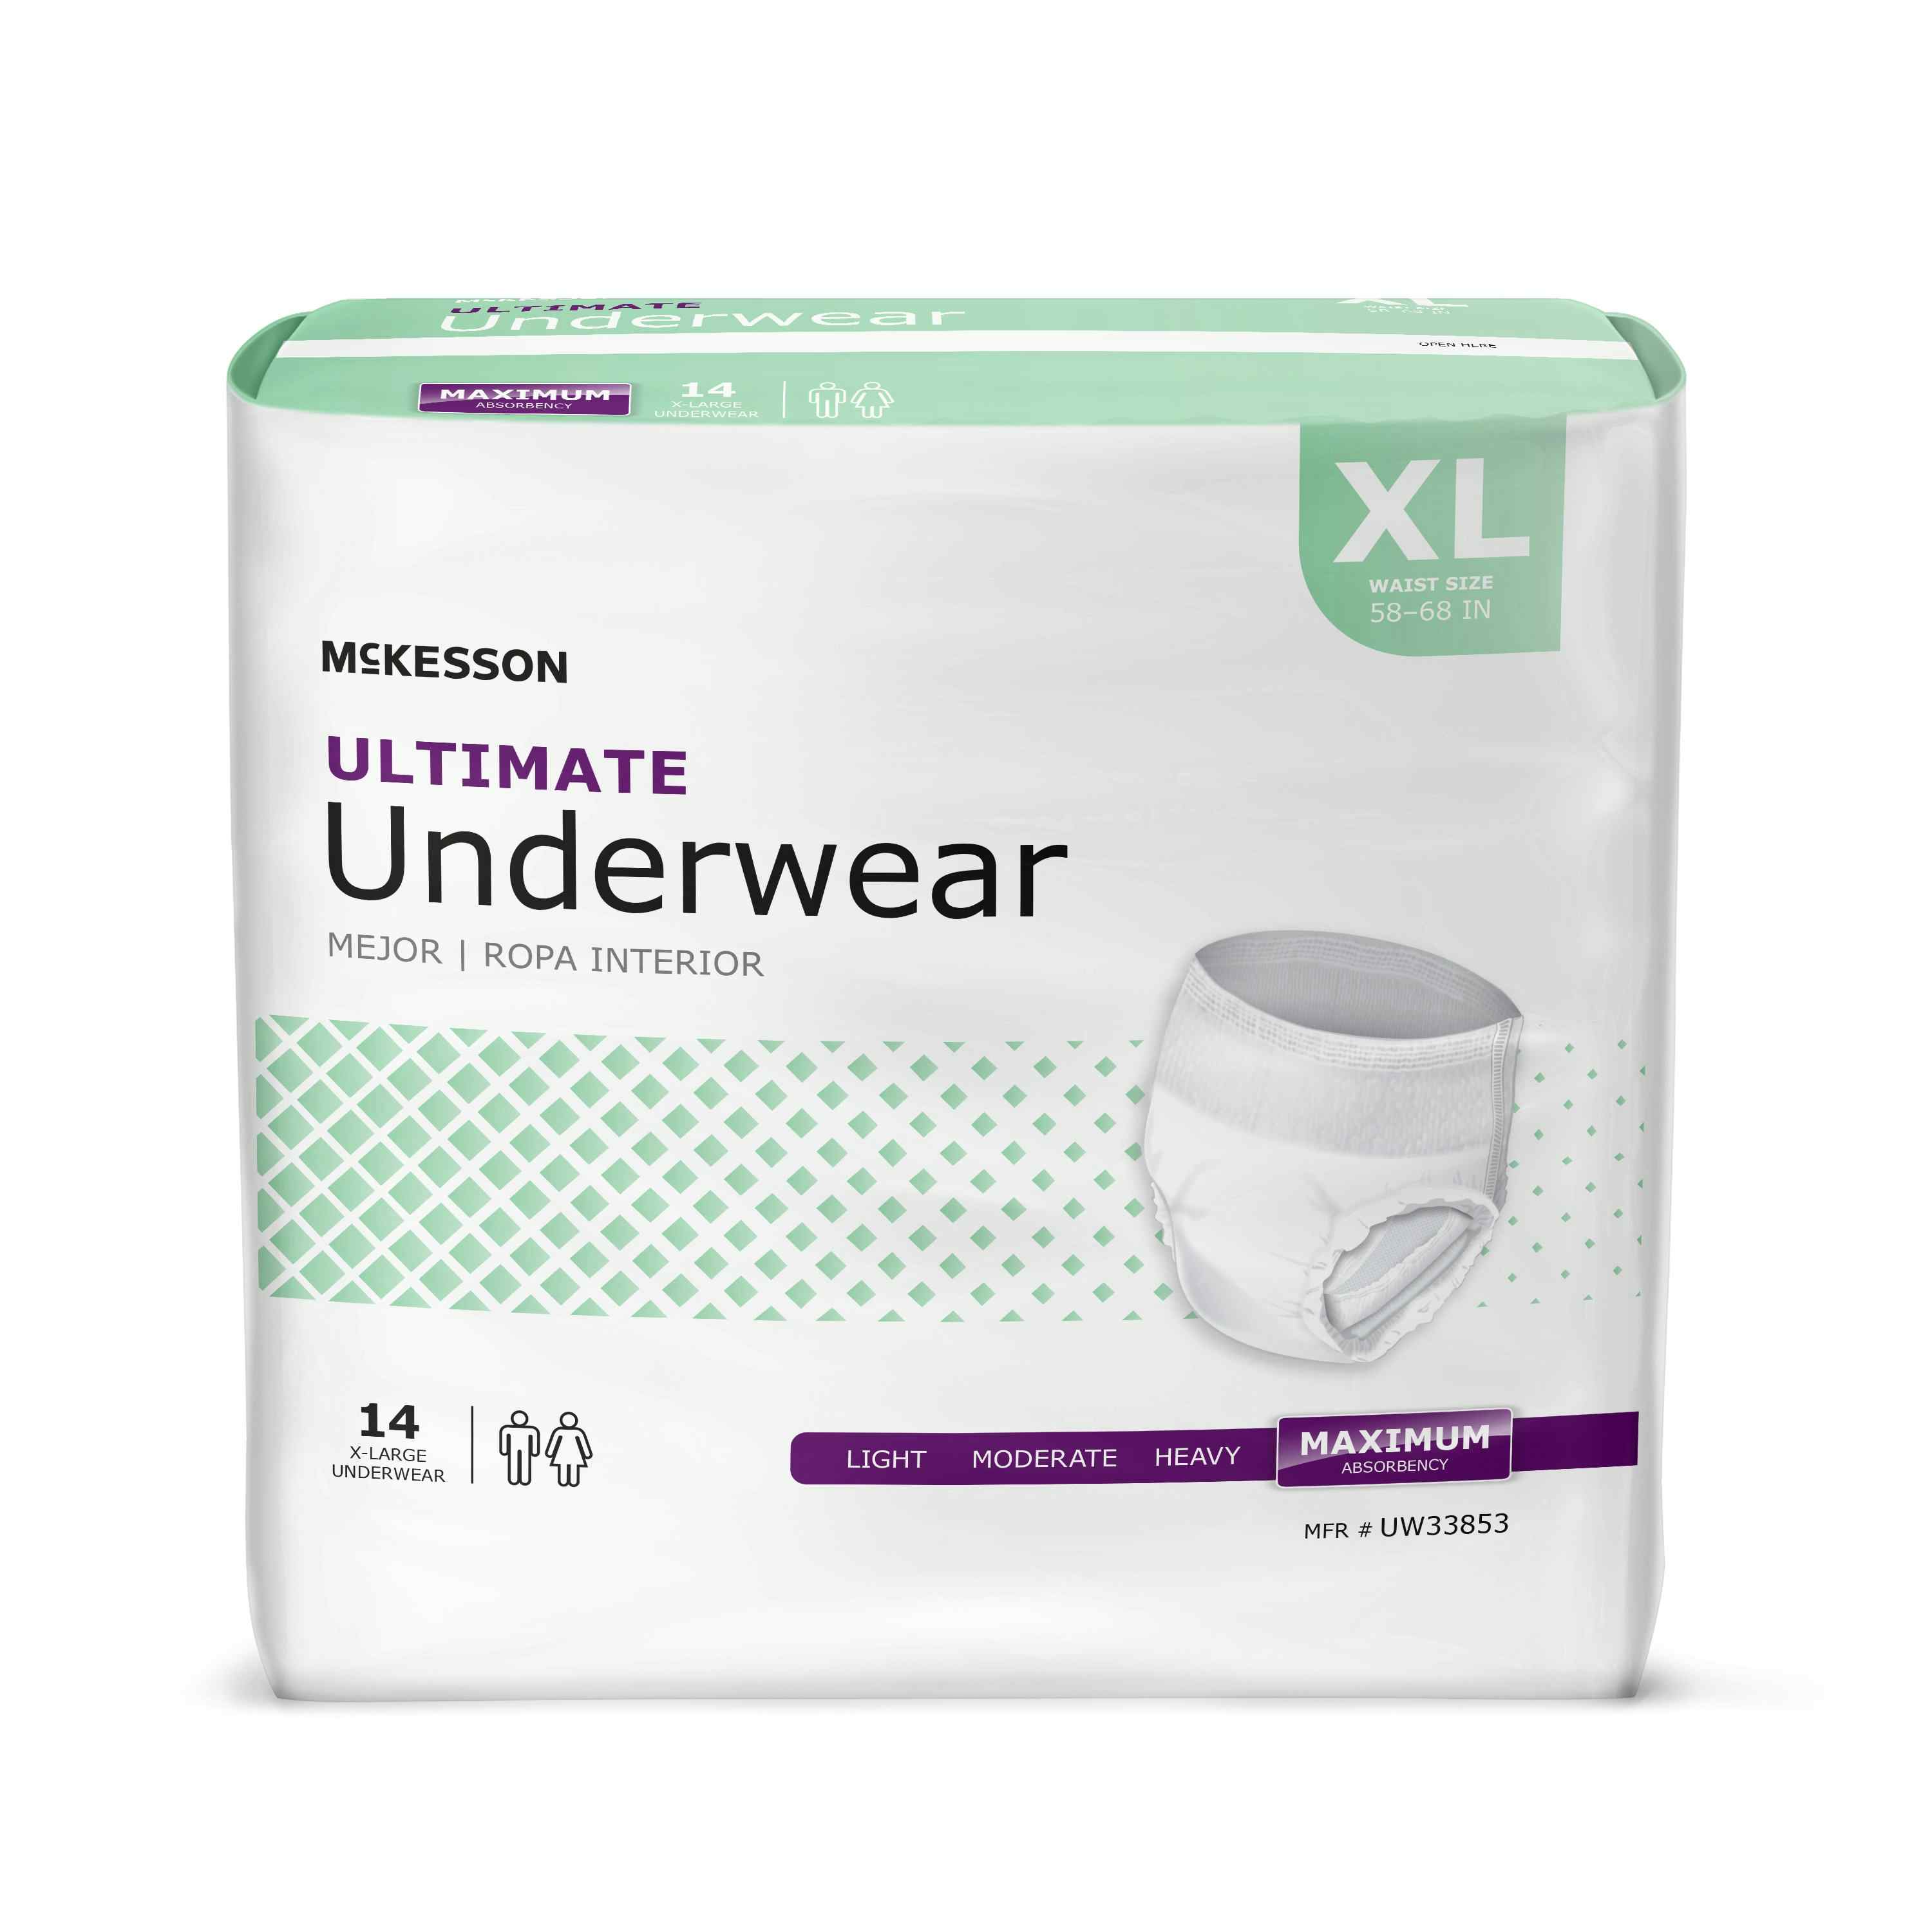 McKesson Unisex Adult Absorbent Pull-On, Heavy Absorbency, UW33853, X-Large (58-68") 